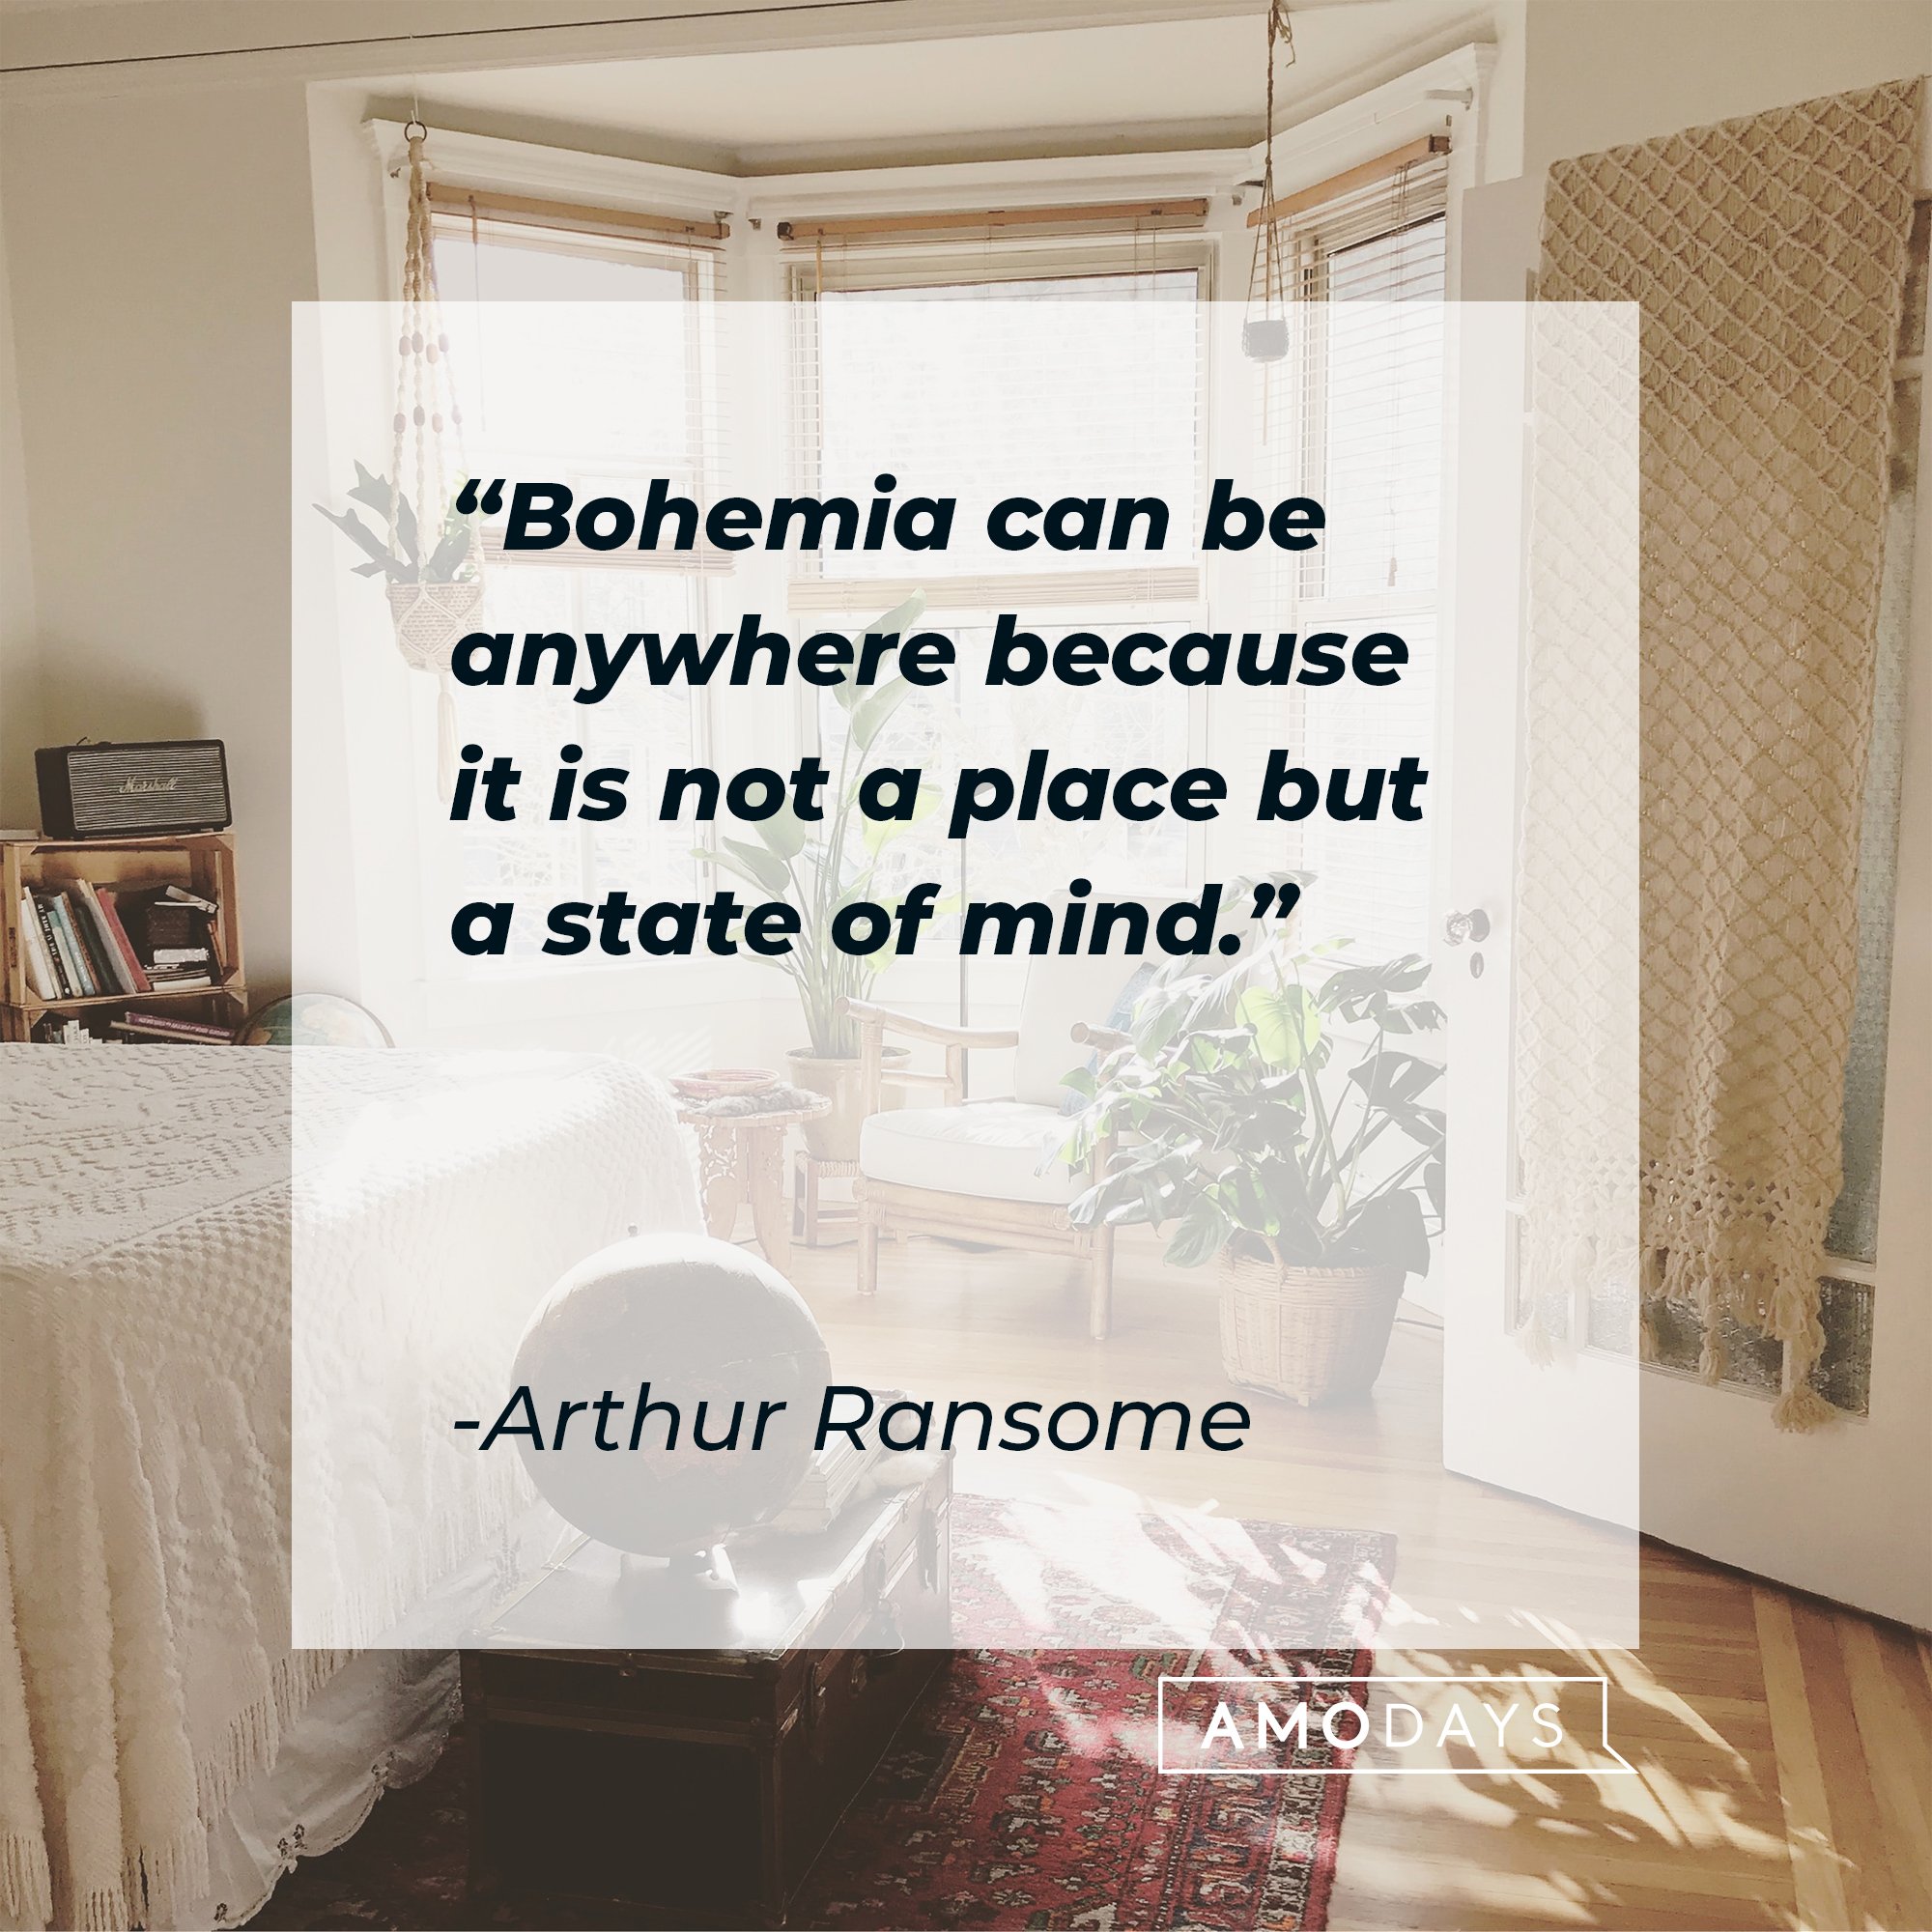   Arthur Ransome’s quote: "Bohemia can be anywhere because it is not a place but a state of mind." | Image: AmoDays 